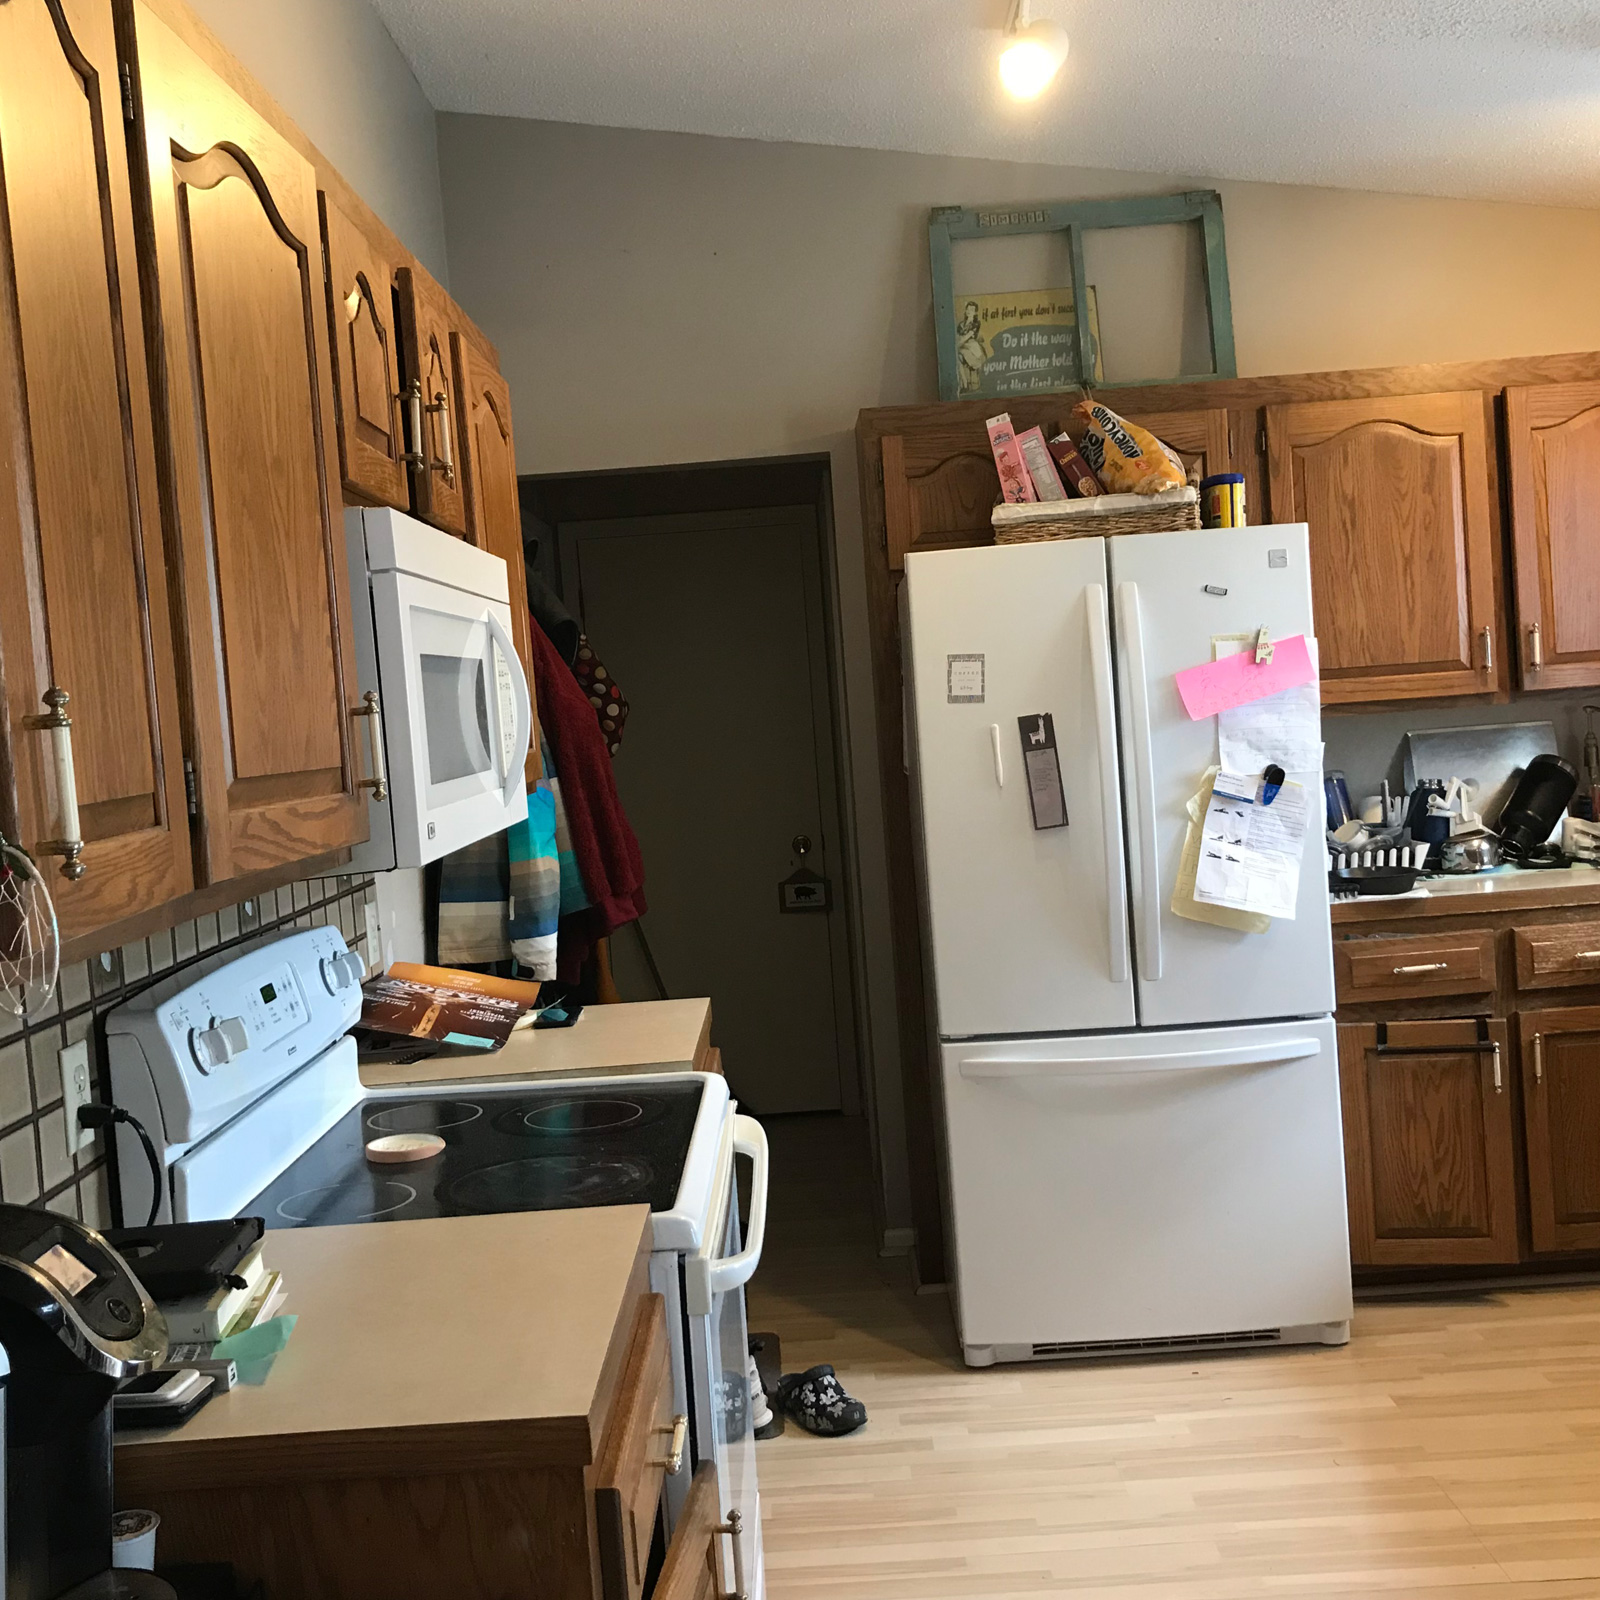 Entry 111 - It's time to renovate this dated kitchen